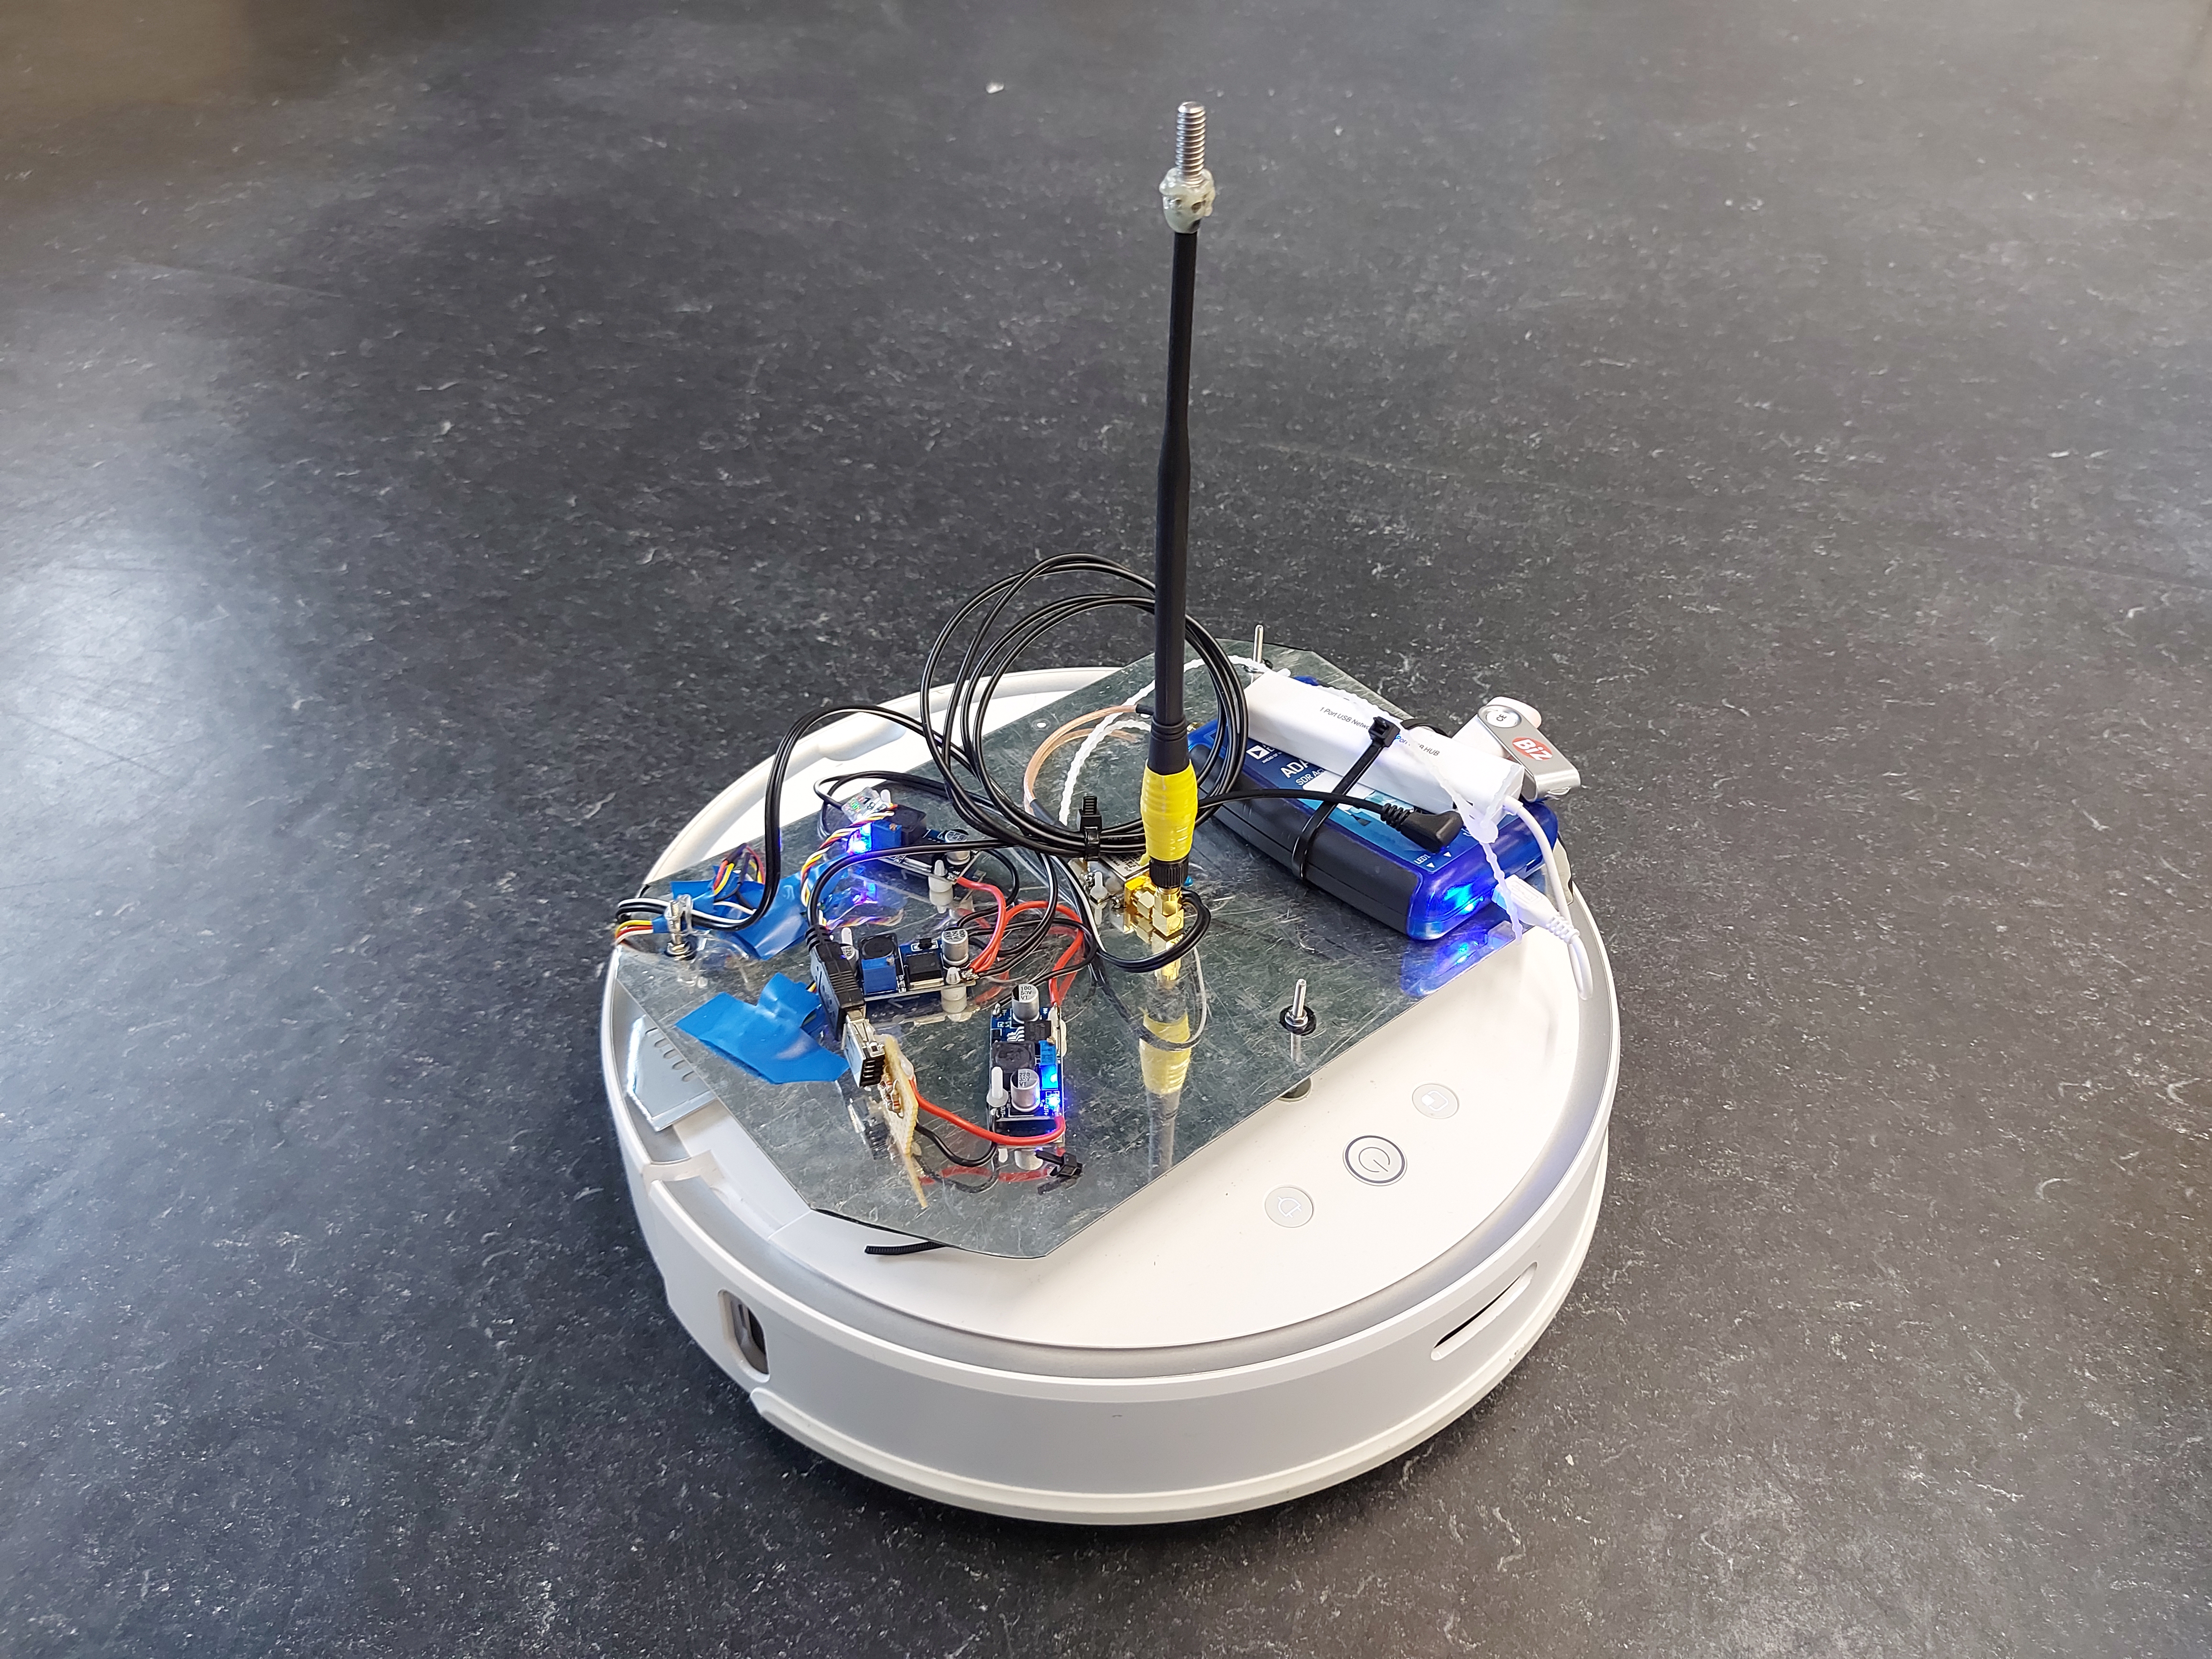 Vacuum robot on top of which PlutoSDR with transmit antenna was mounted and whose LiDAR positioning is used as ground truth label.